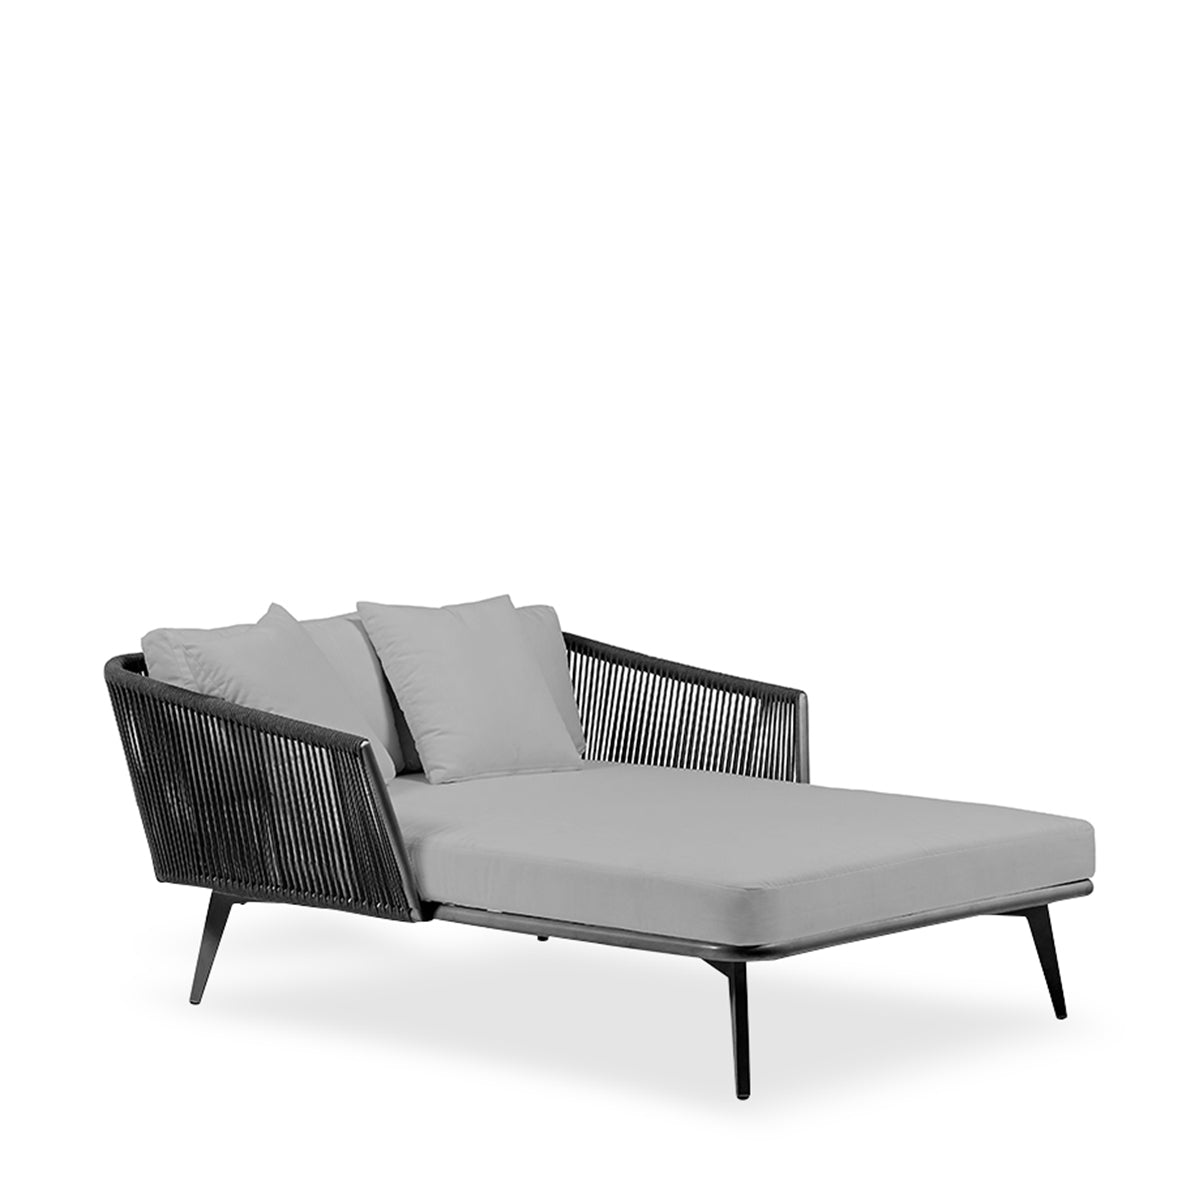 DIVA DOUBLE DAYBED